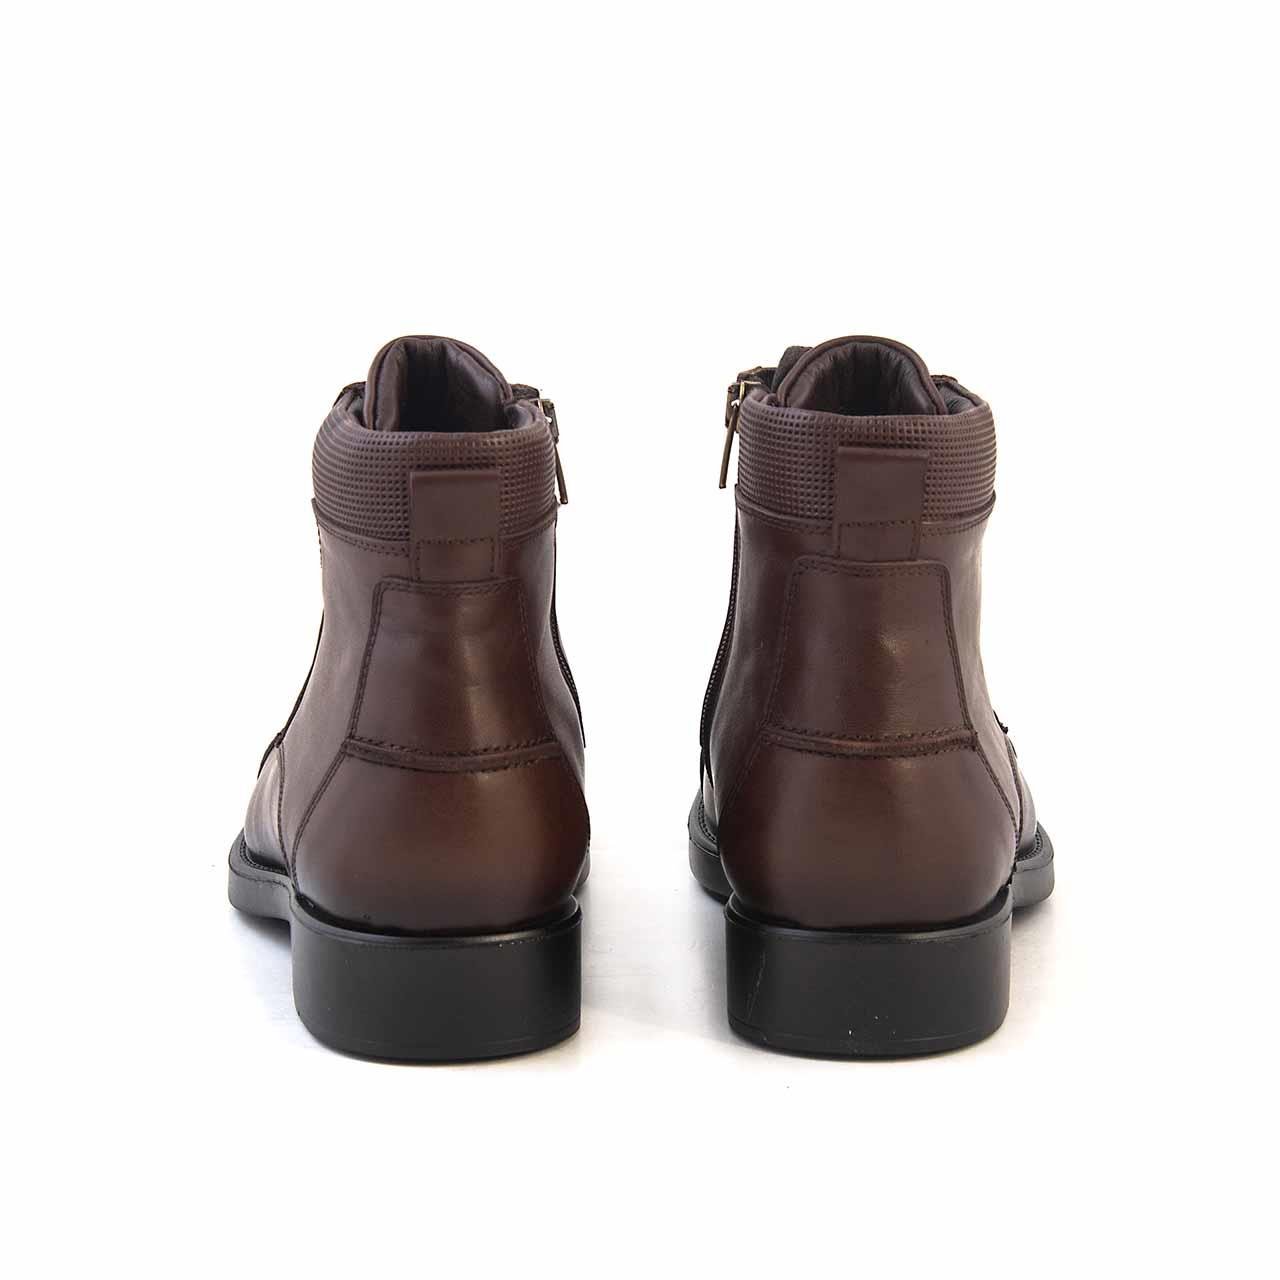 Kemal Tanca Leather Men's Boots